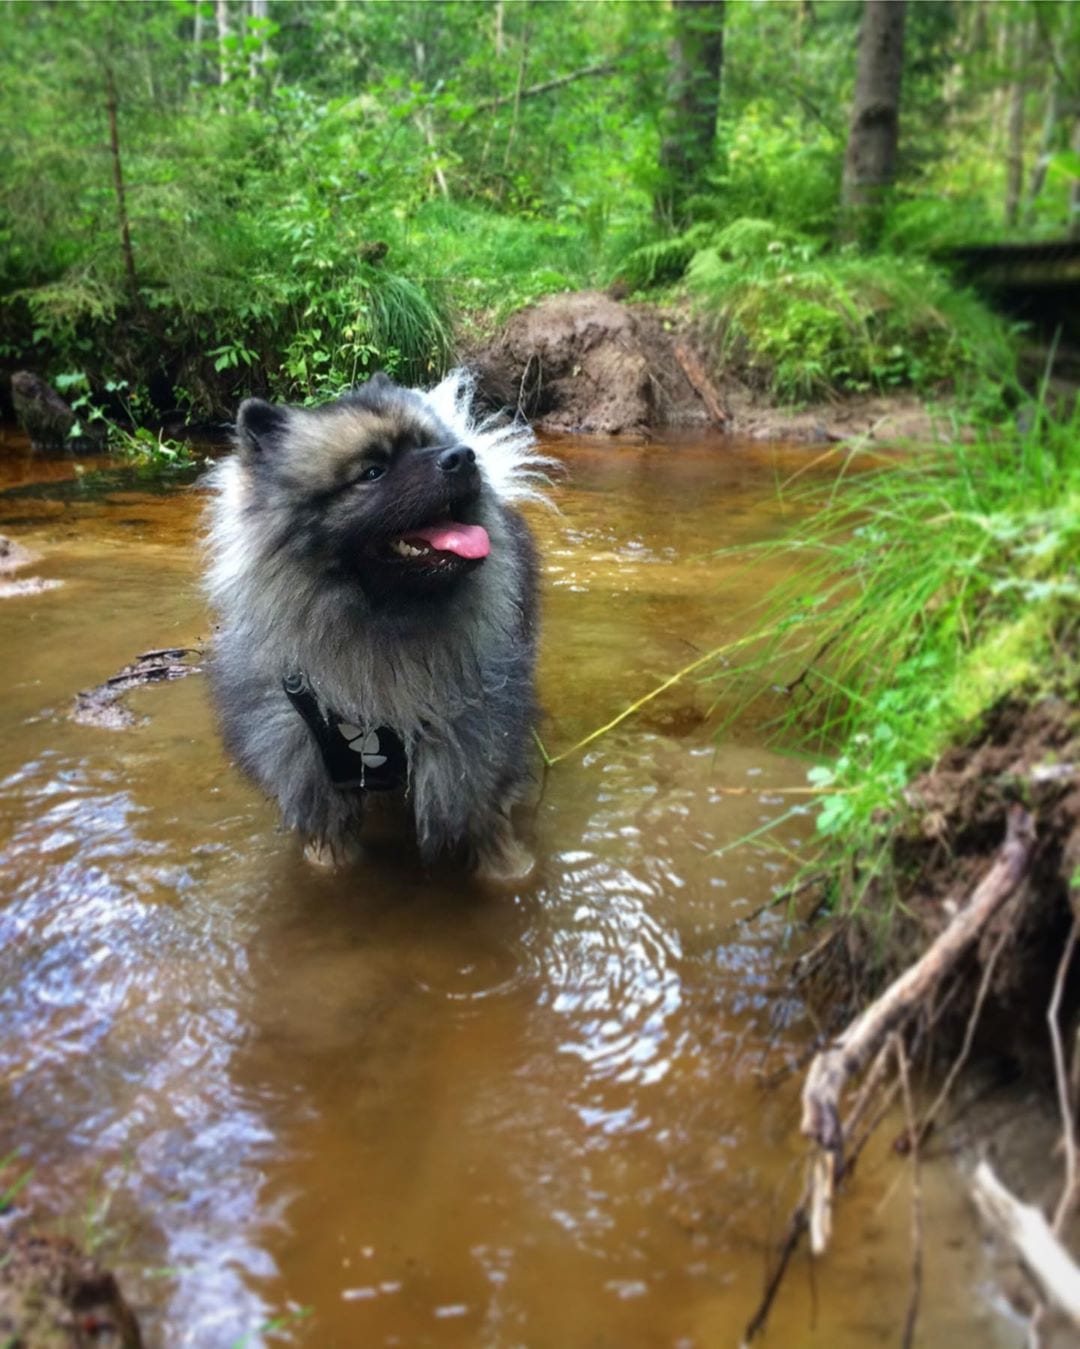 A Keeshond standing in the river